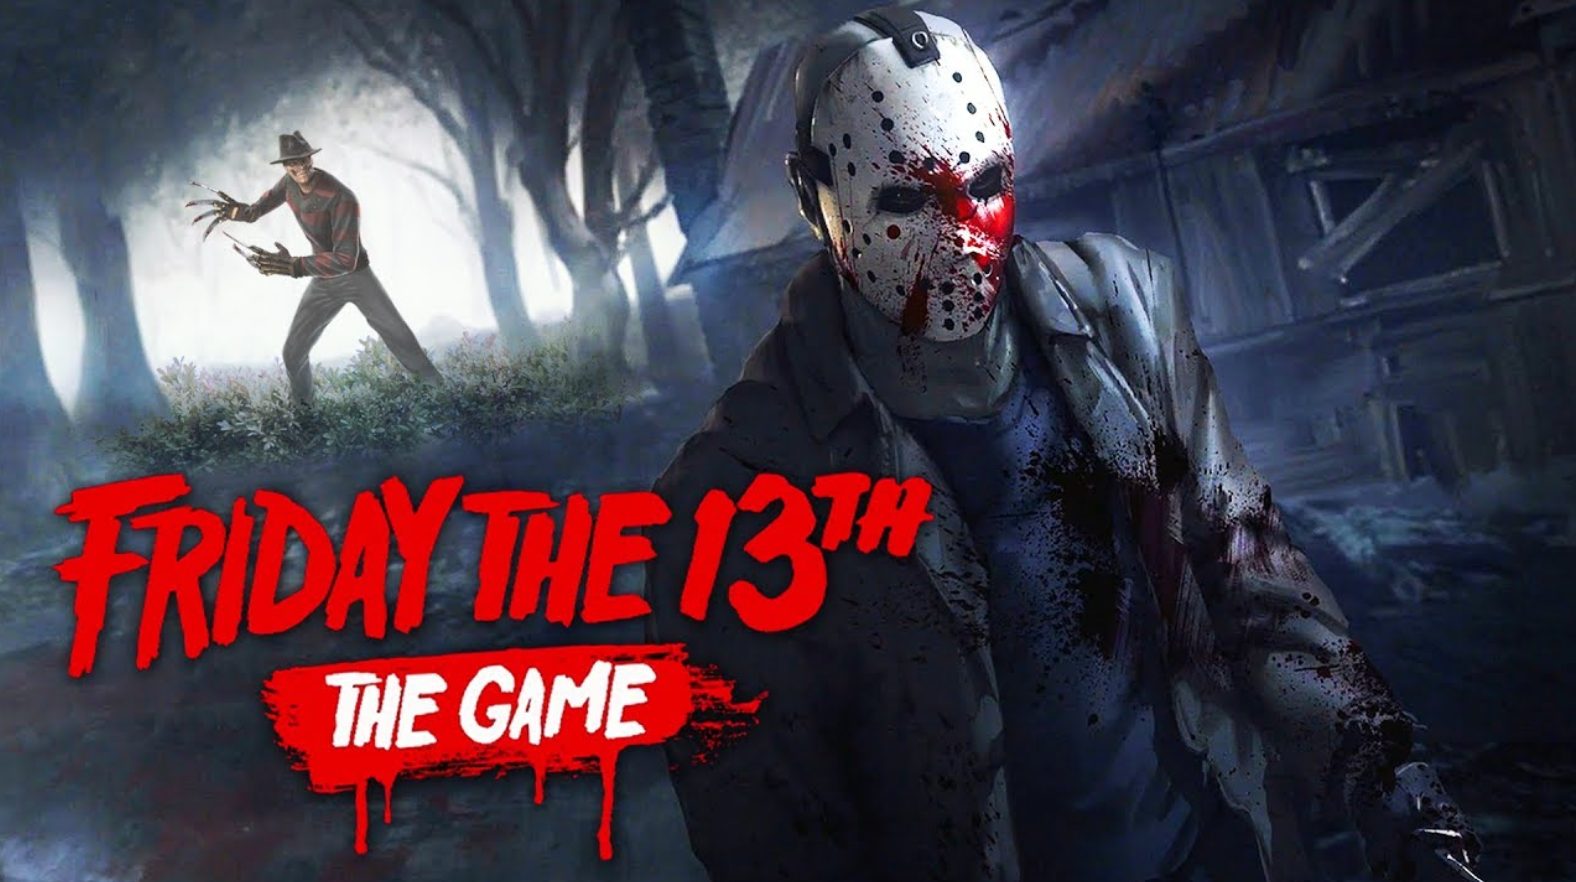 Friday the 13th The Game Download PC Game Full Version Free Download